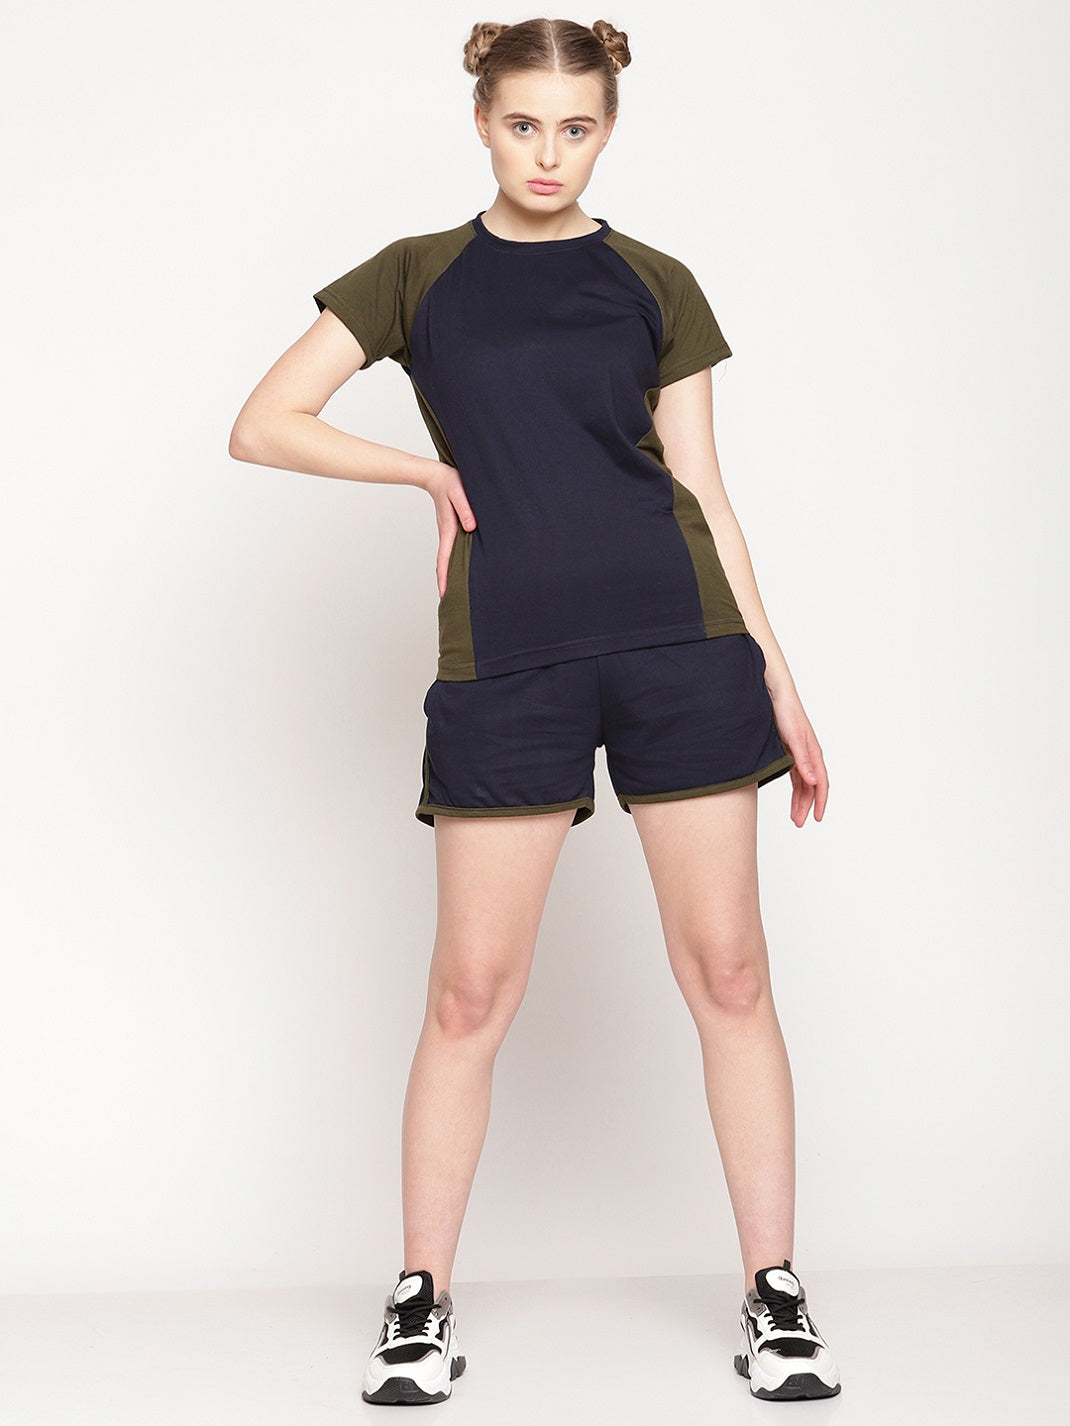 UZARUS Women's Cotton Set of Top and Shorts